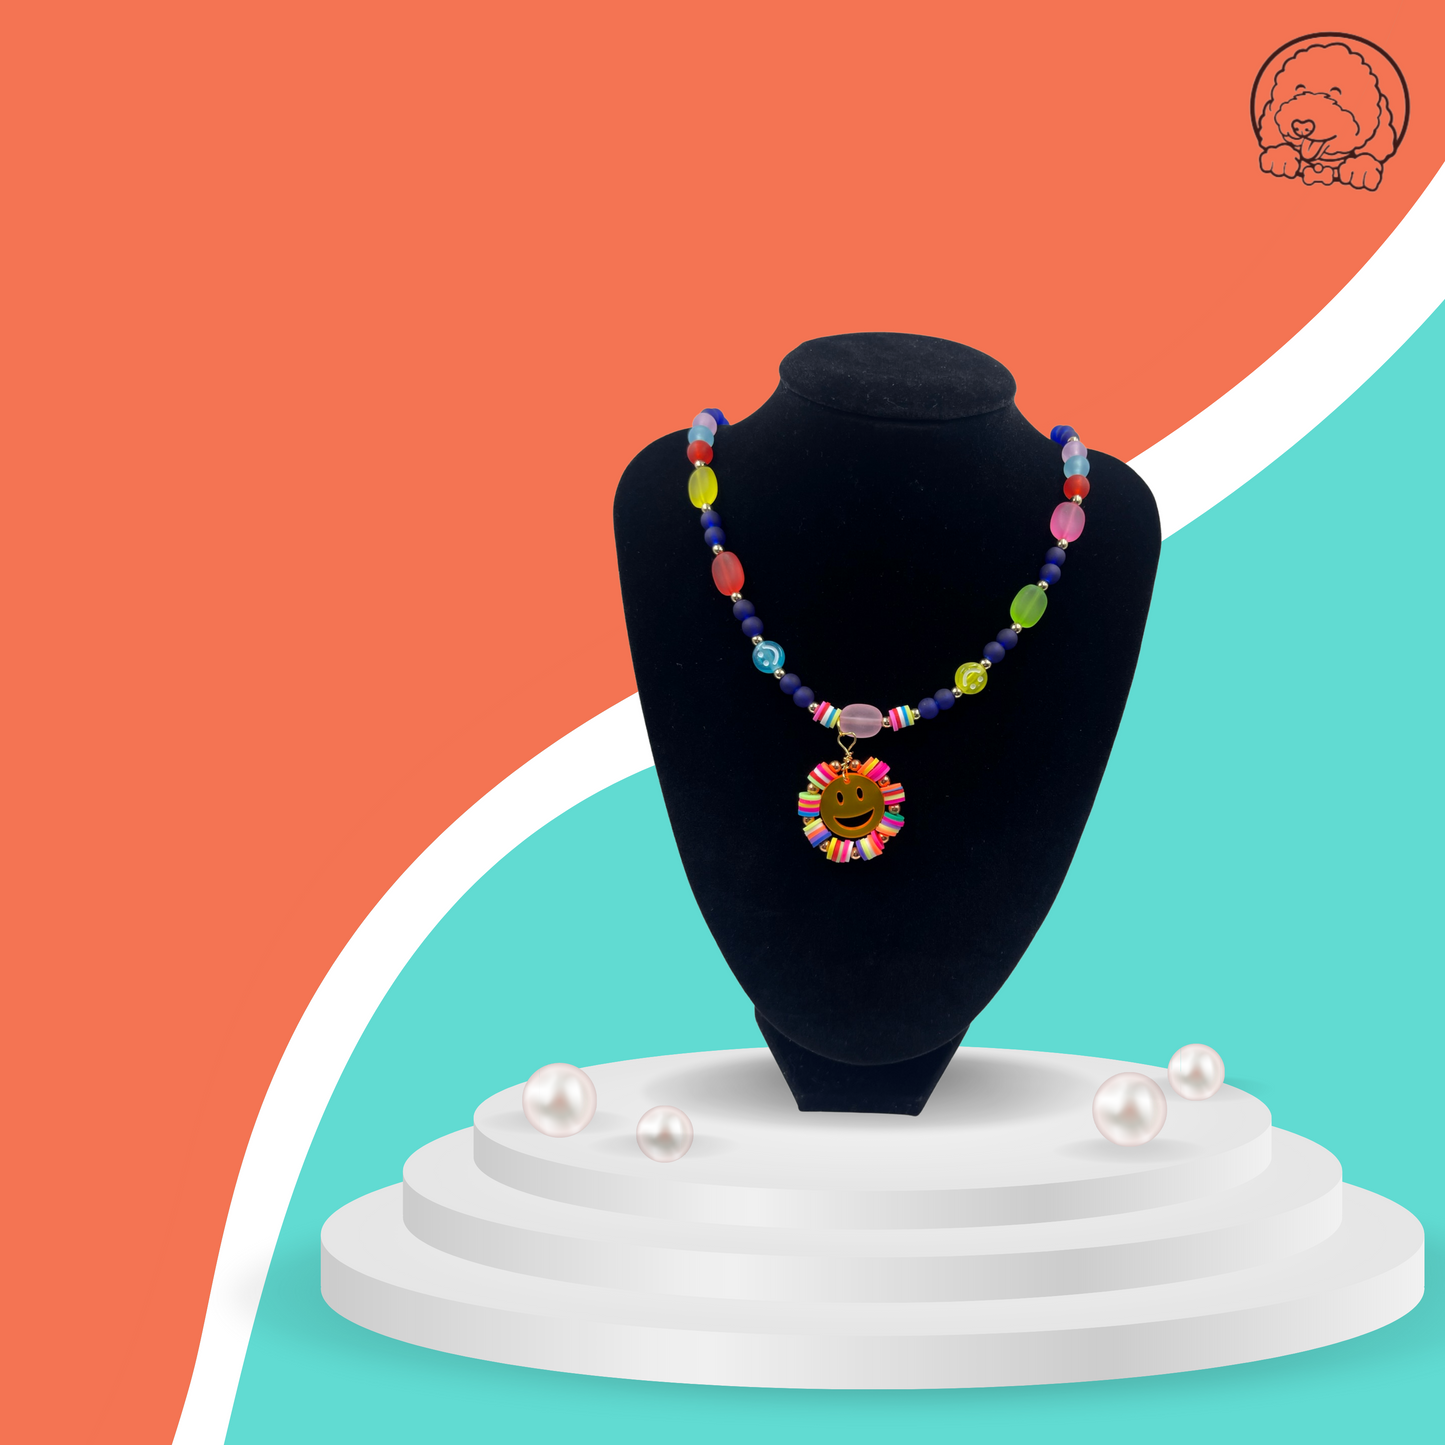 Necklace (happy flower)